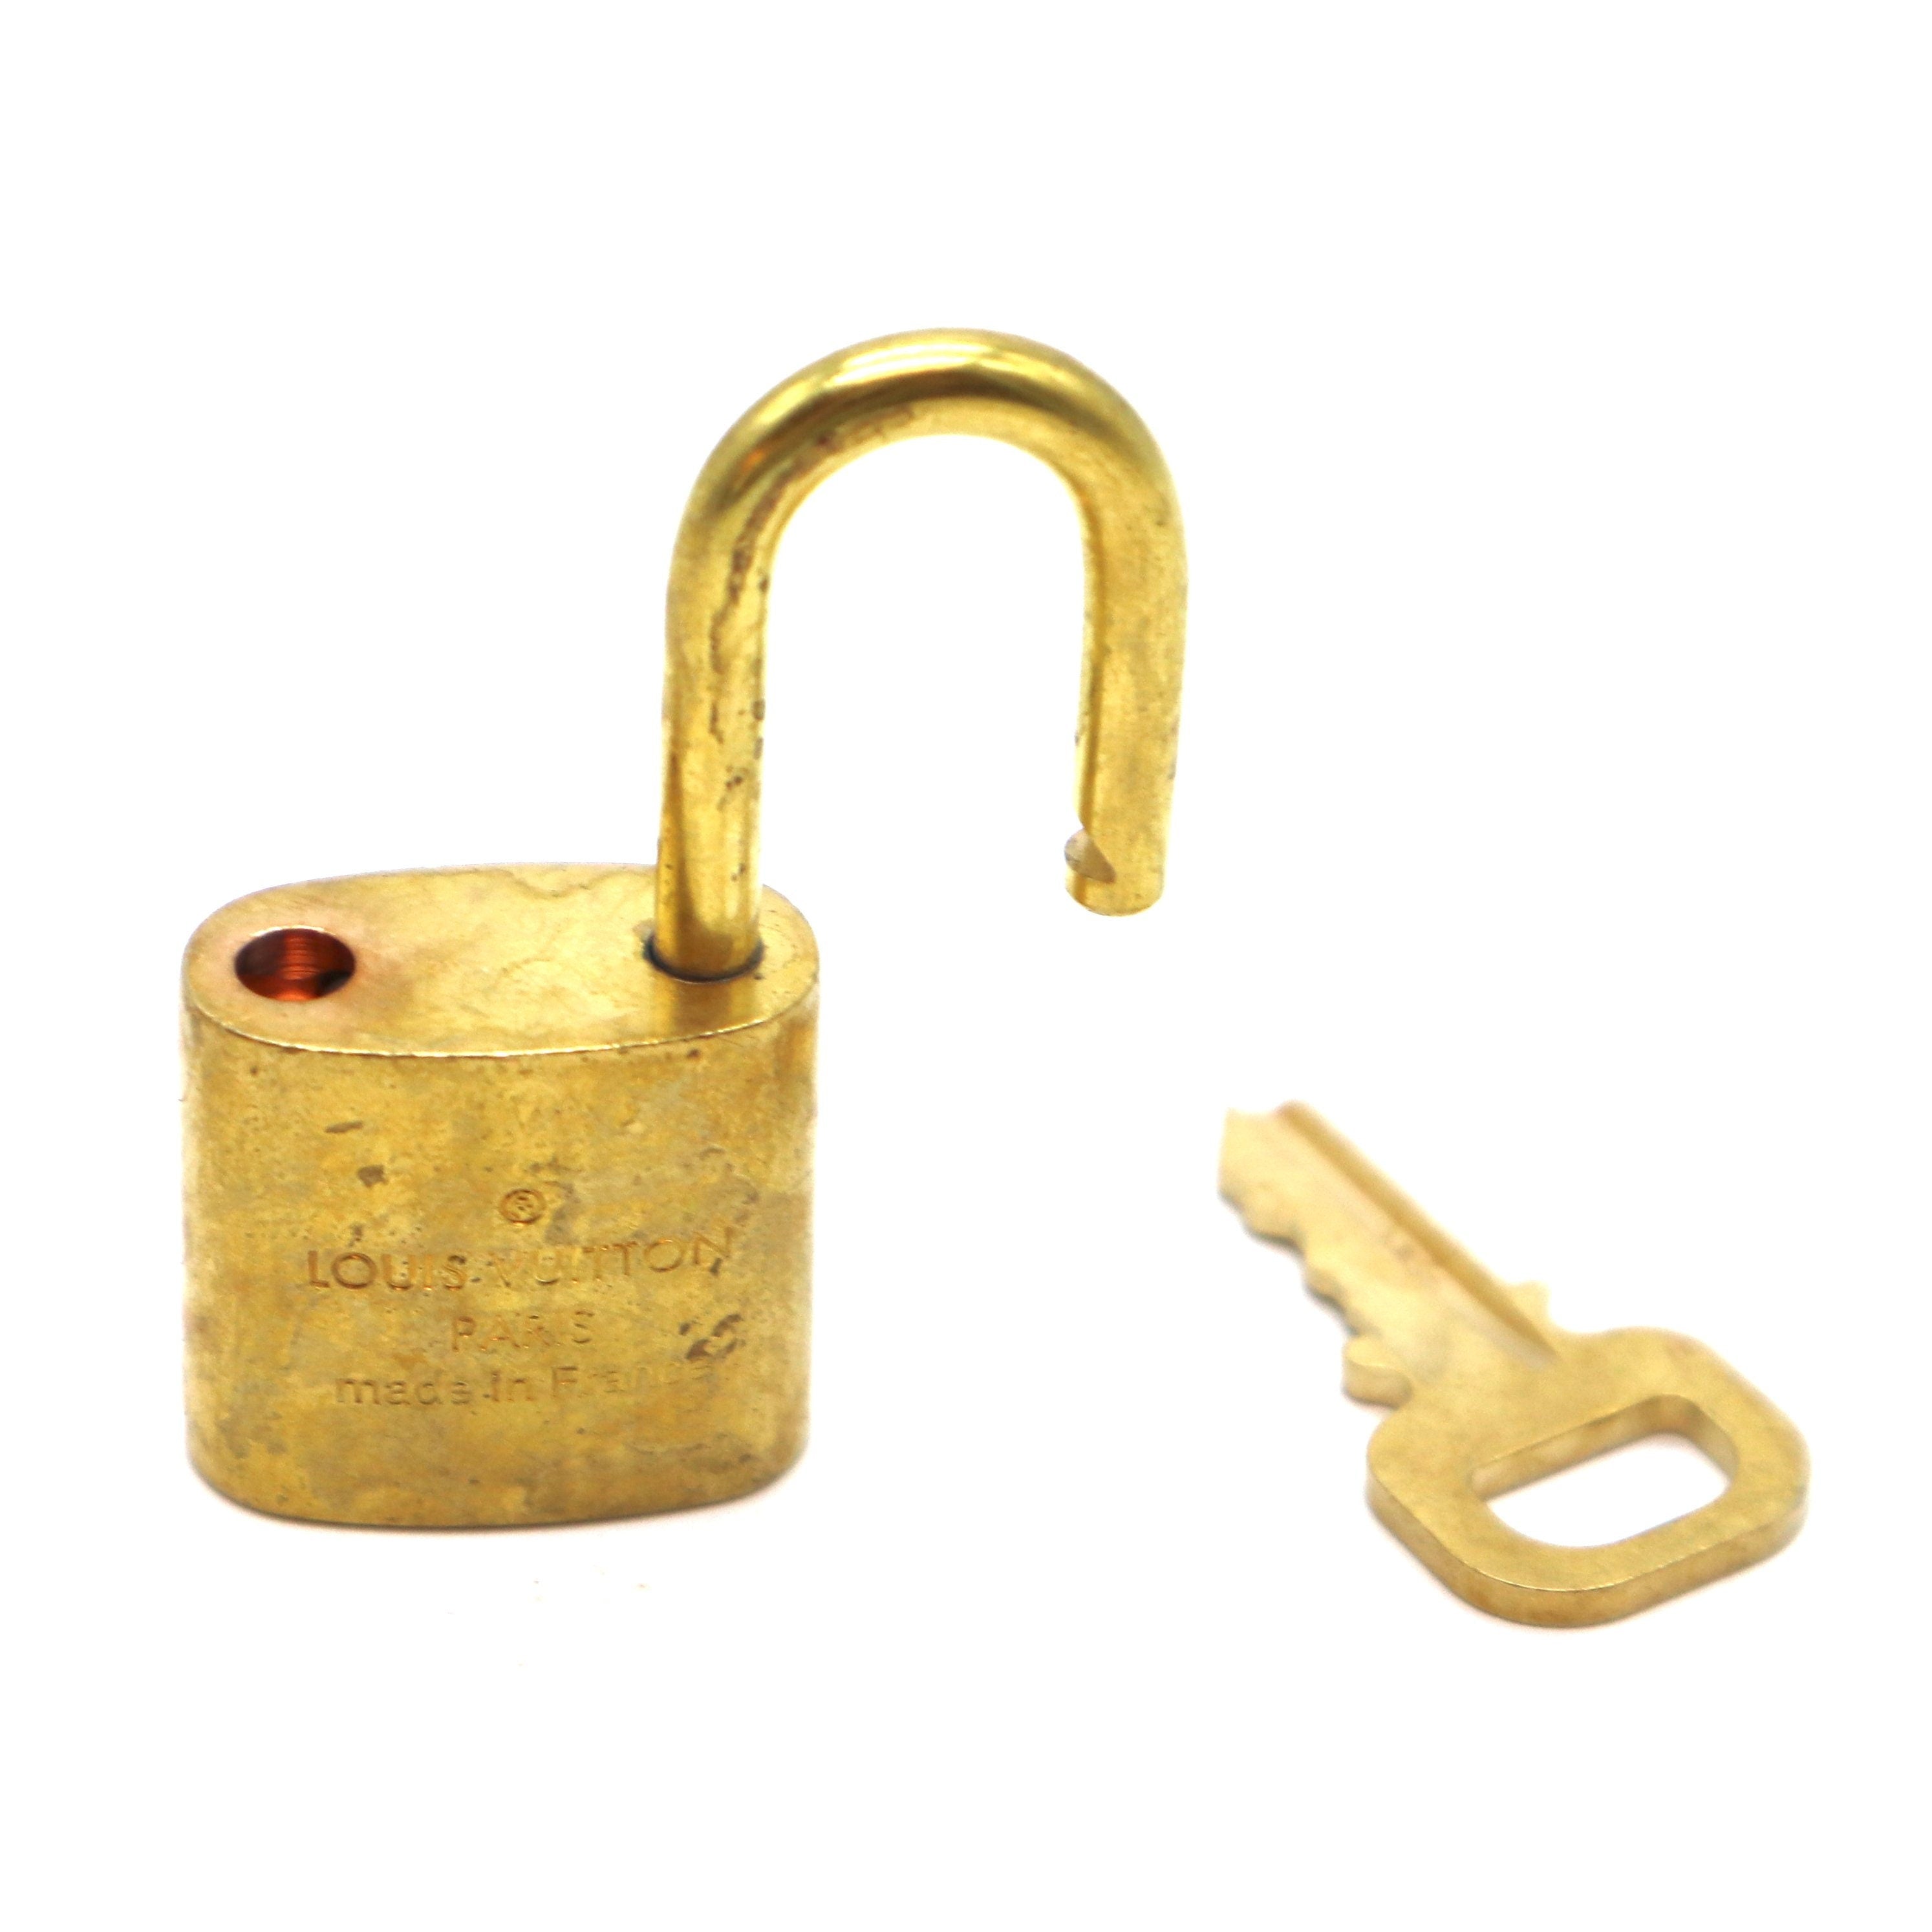 Vintage Gold Brass Lock and Key Set by Vuitton - Free Shipping - Thrilling